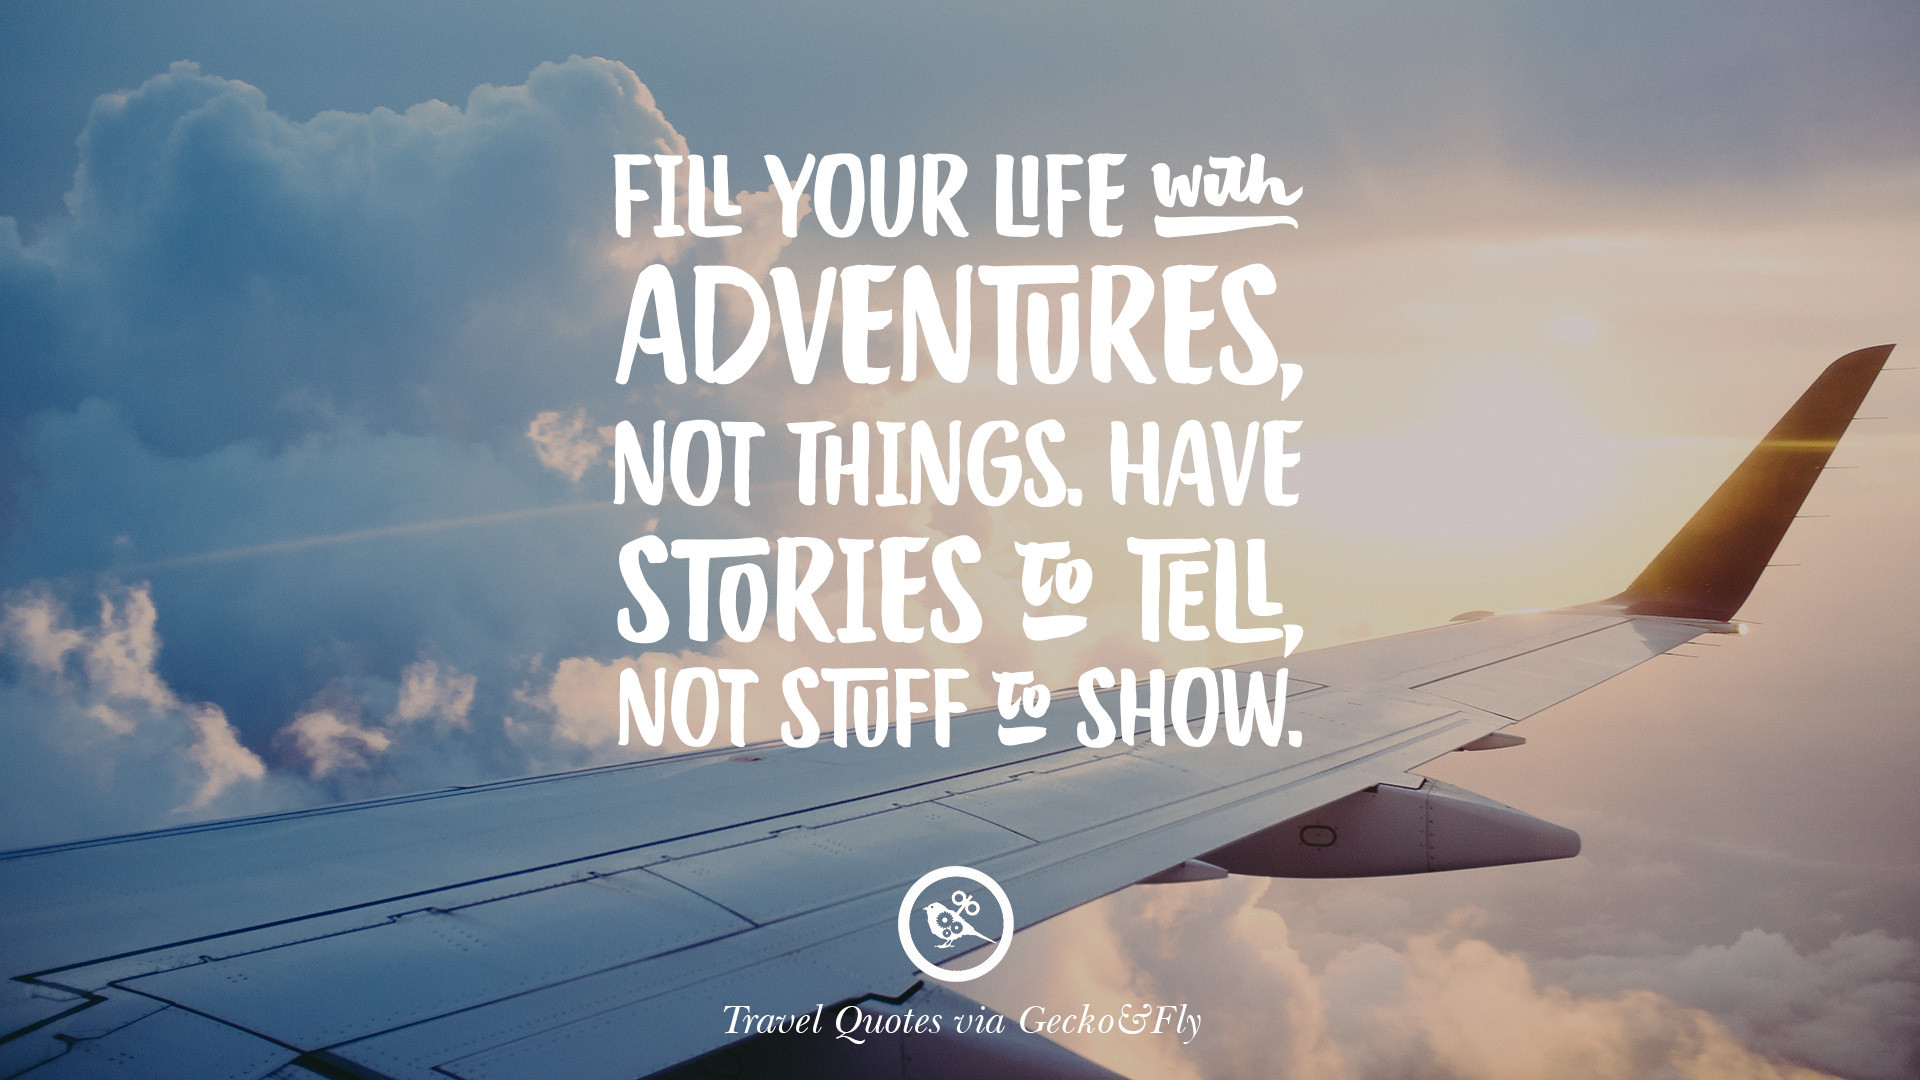 Life Is An Adventure Quotes
 20 Adventurous Quotes Traveling And Exploring The World